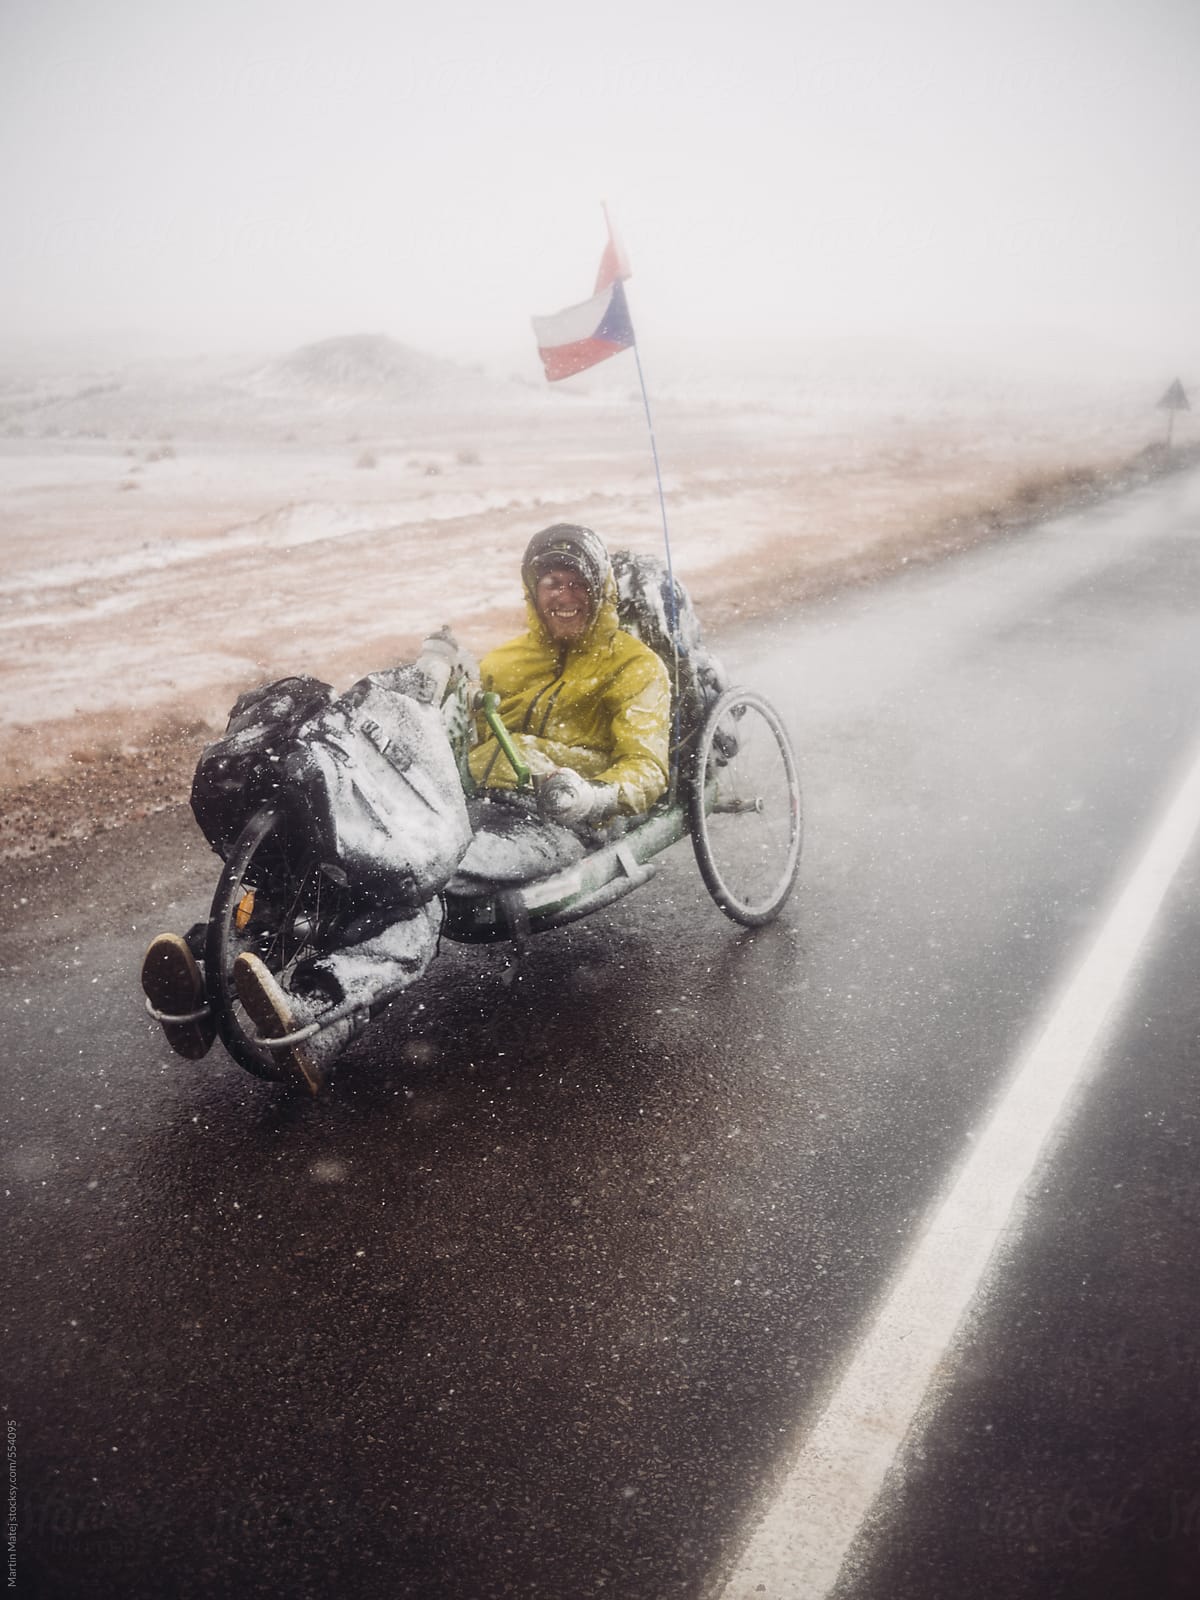 Handbiker covered in snow standing on the road